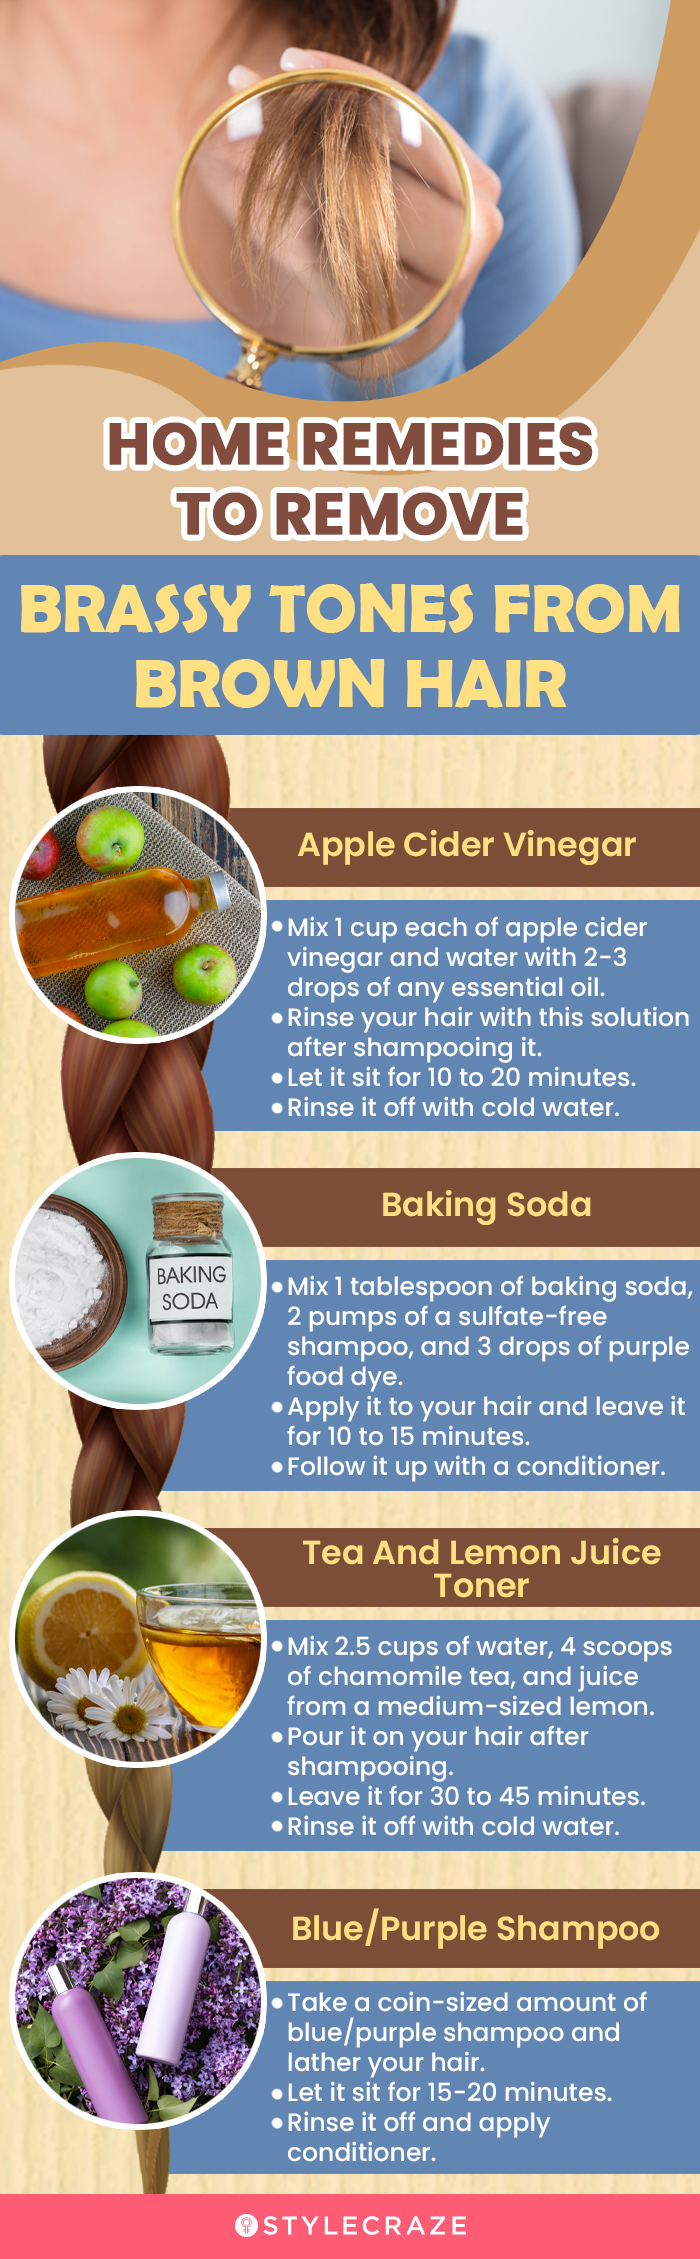 home remedies to remove brassy tones from brown hair (infographic)